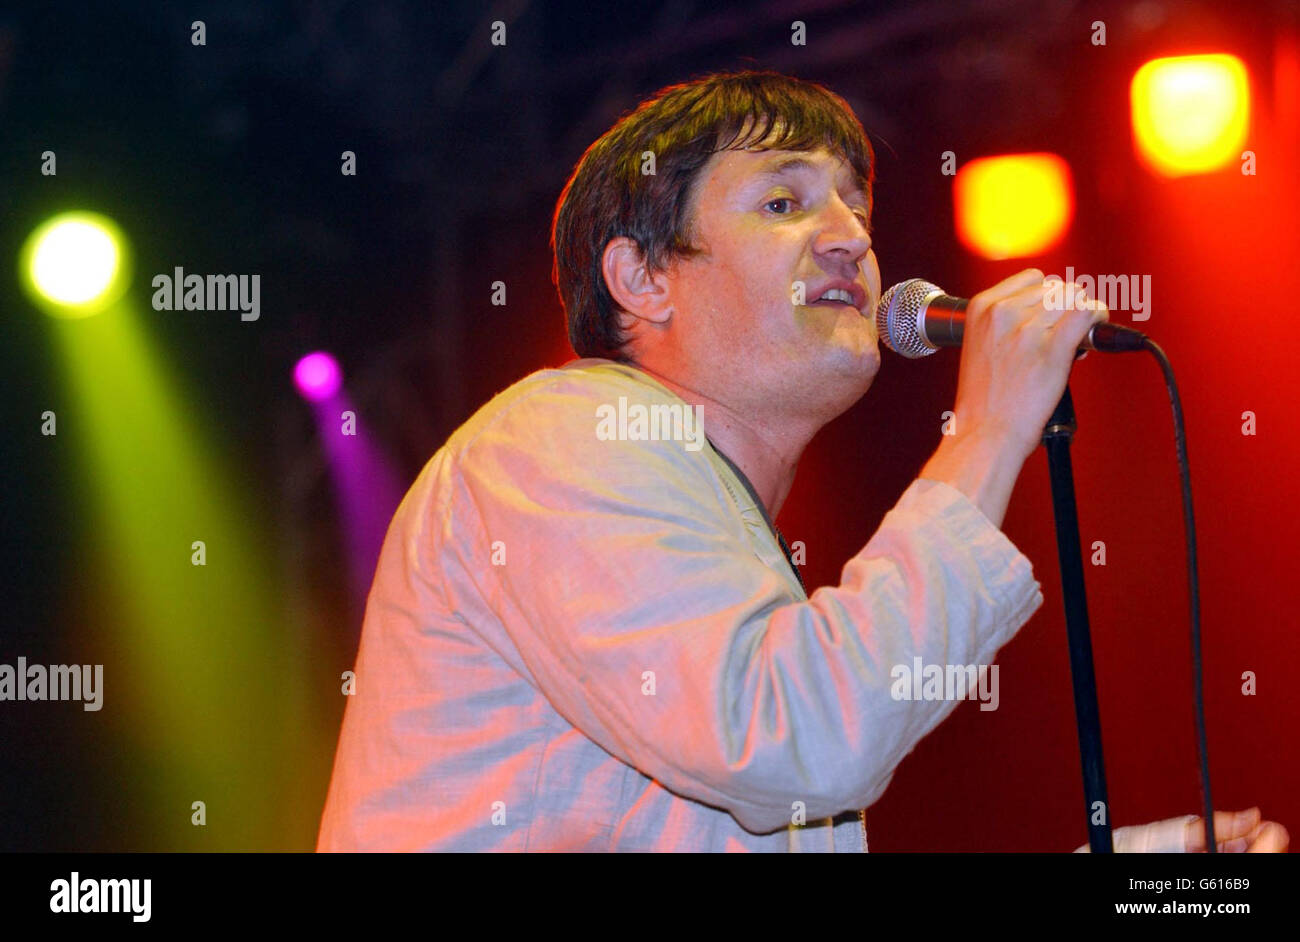 Paul Heaton, singer with The Beautiful South, performs on stage at the V2002 music festival in Chelmsford, Essex. Stock Photo